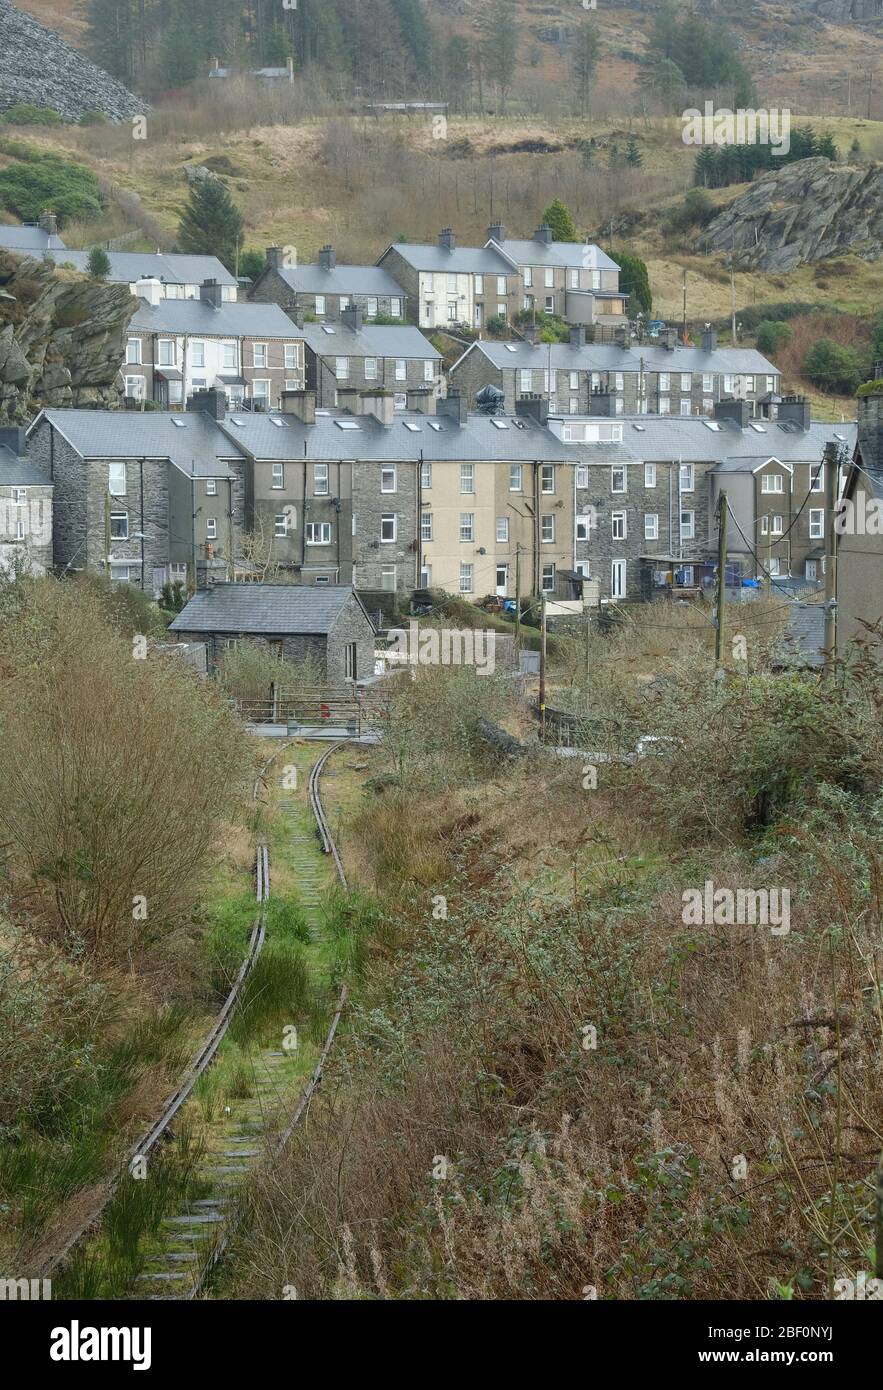 Victorian houses in the upland town of Blaenau Ffestiniog in Snowdonia, North Wales Stock Photo